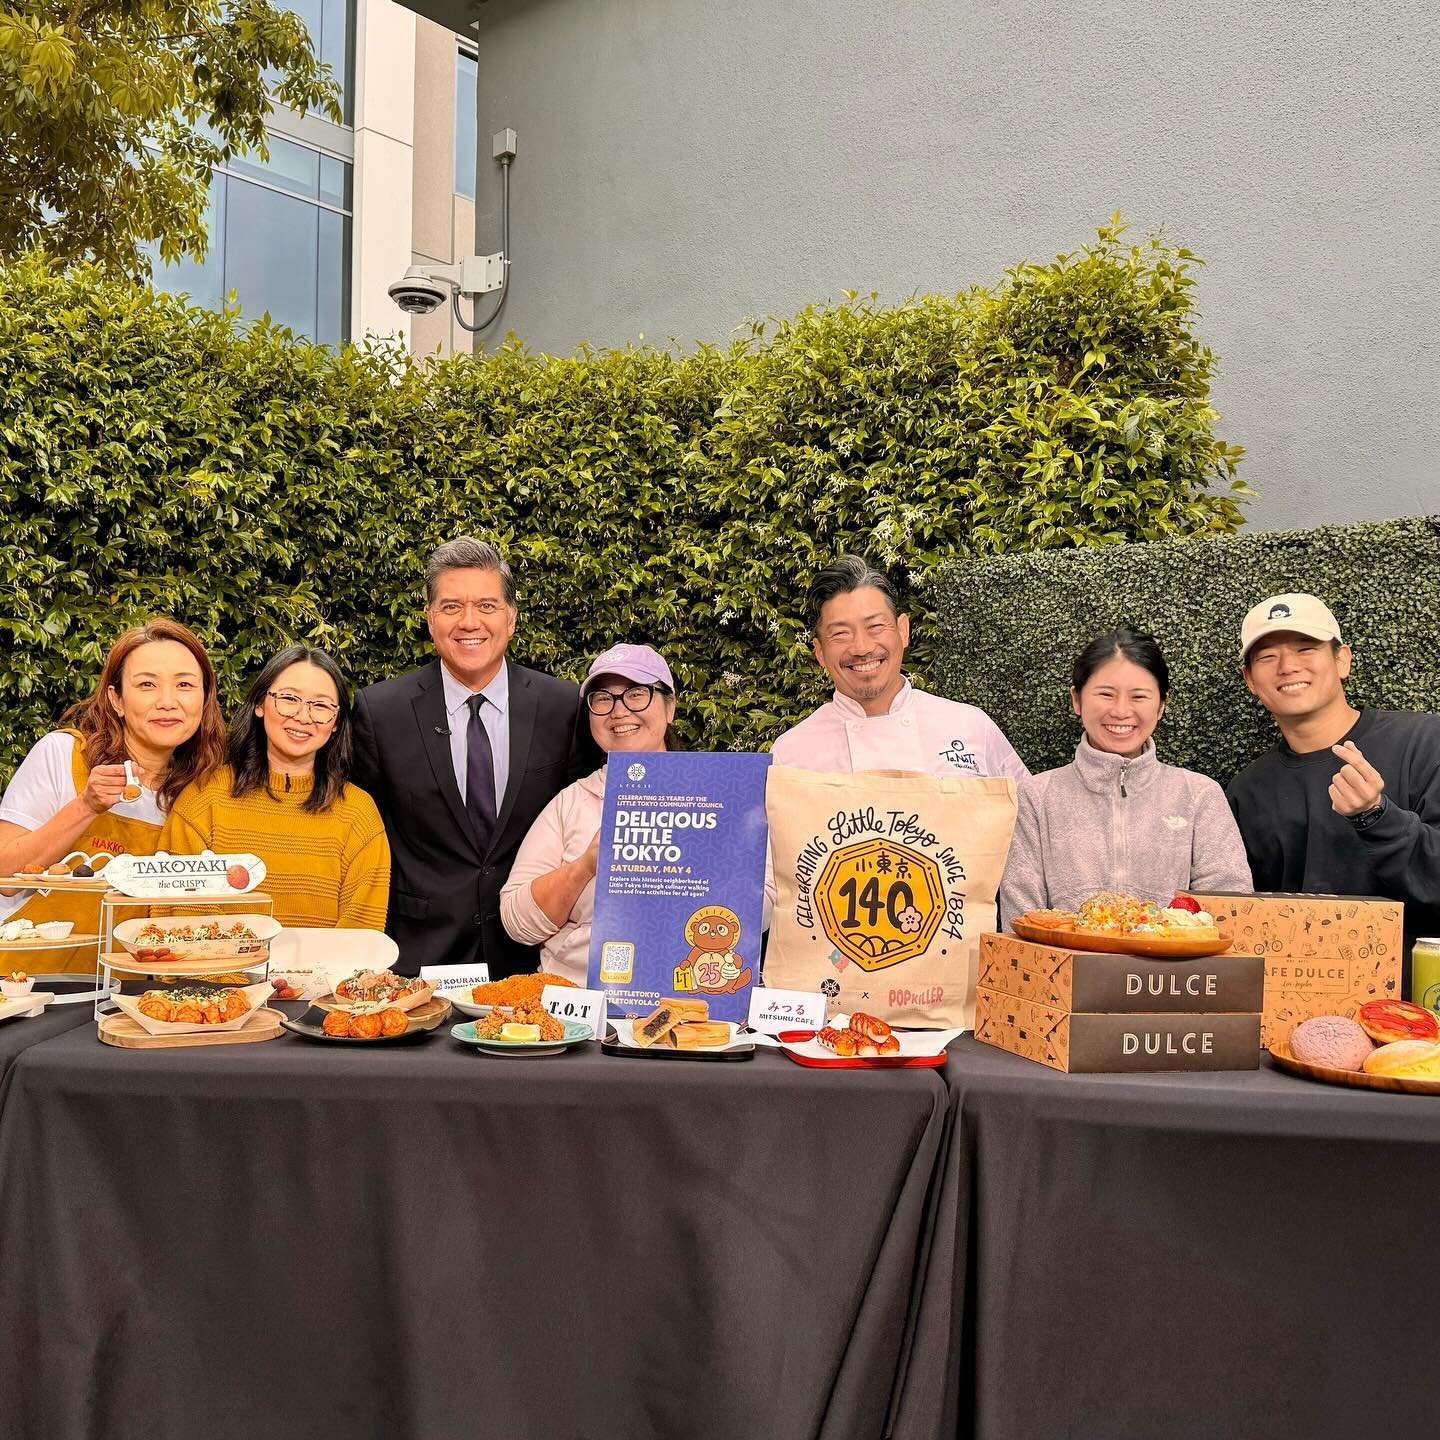 Shout out to @ktla5news and @frankbuckleytv for having us on the morning news today! 🎥 Delicious Little Tokyo is just over a week away and we can&rsquo;t wait to celebrate our 140-year-old neighborhood with you all 🥰

Swipe to see everything on the